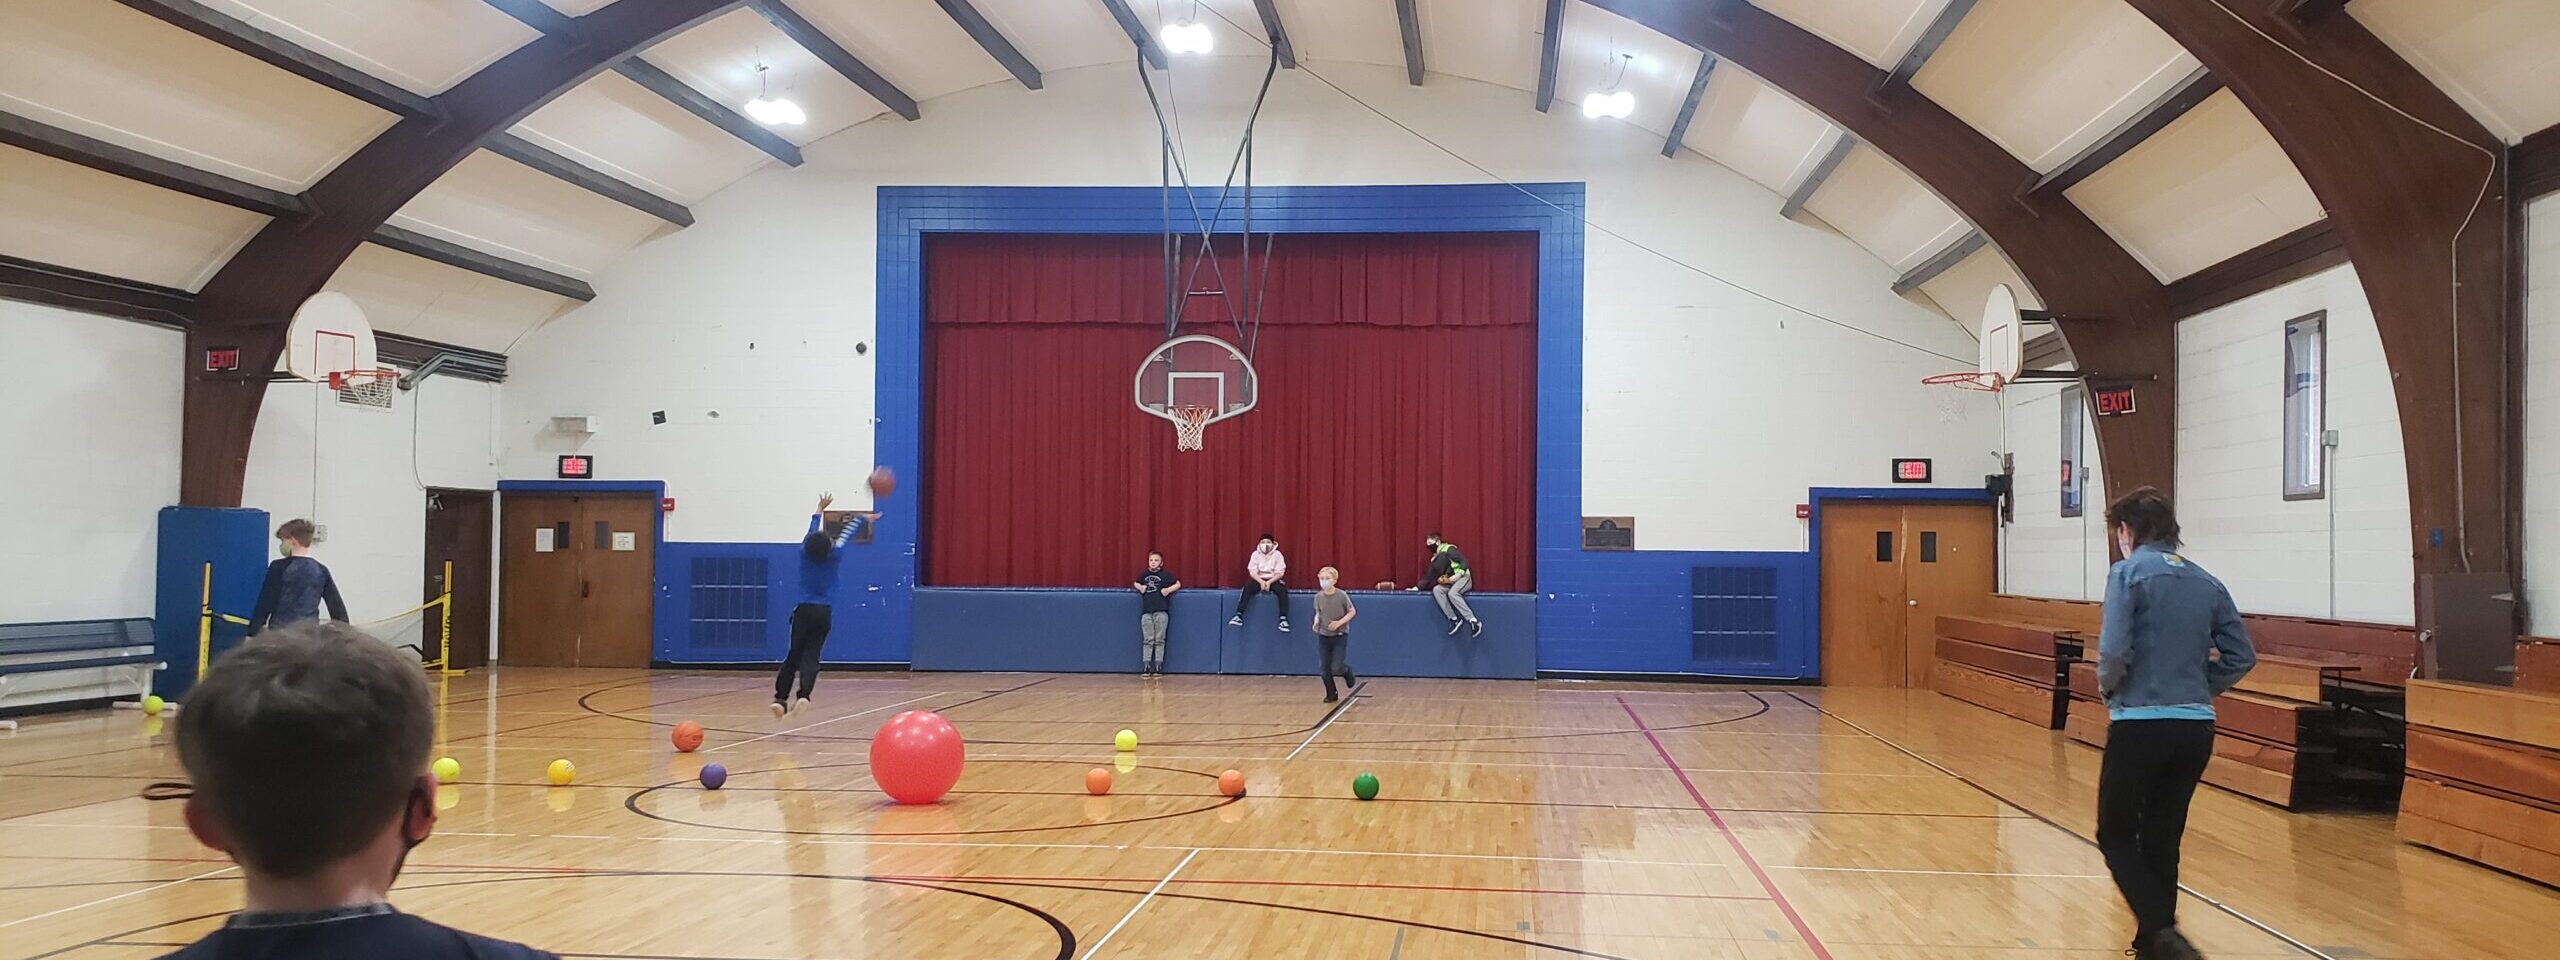 kids playing in the school gym